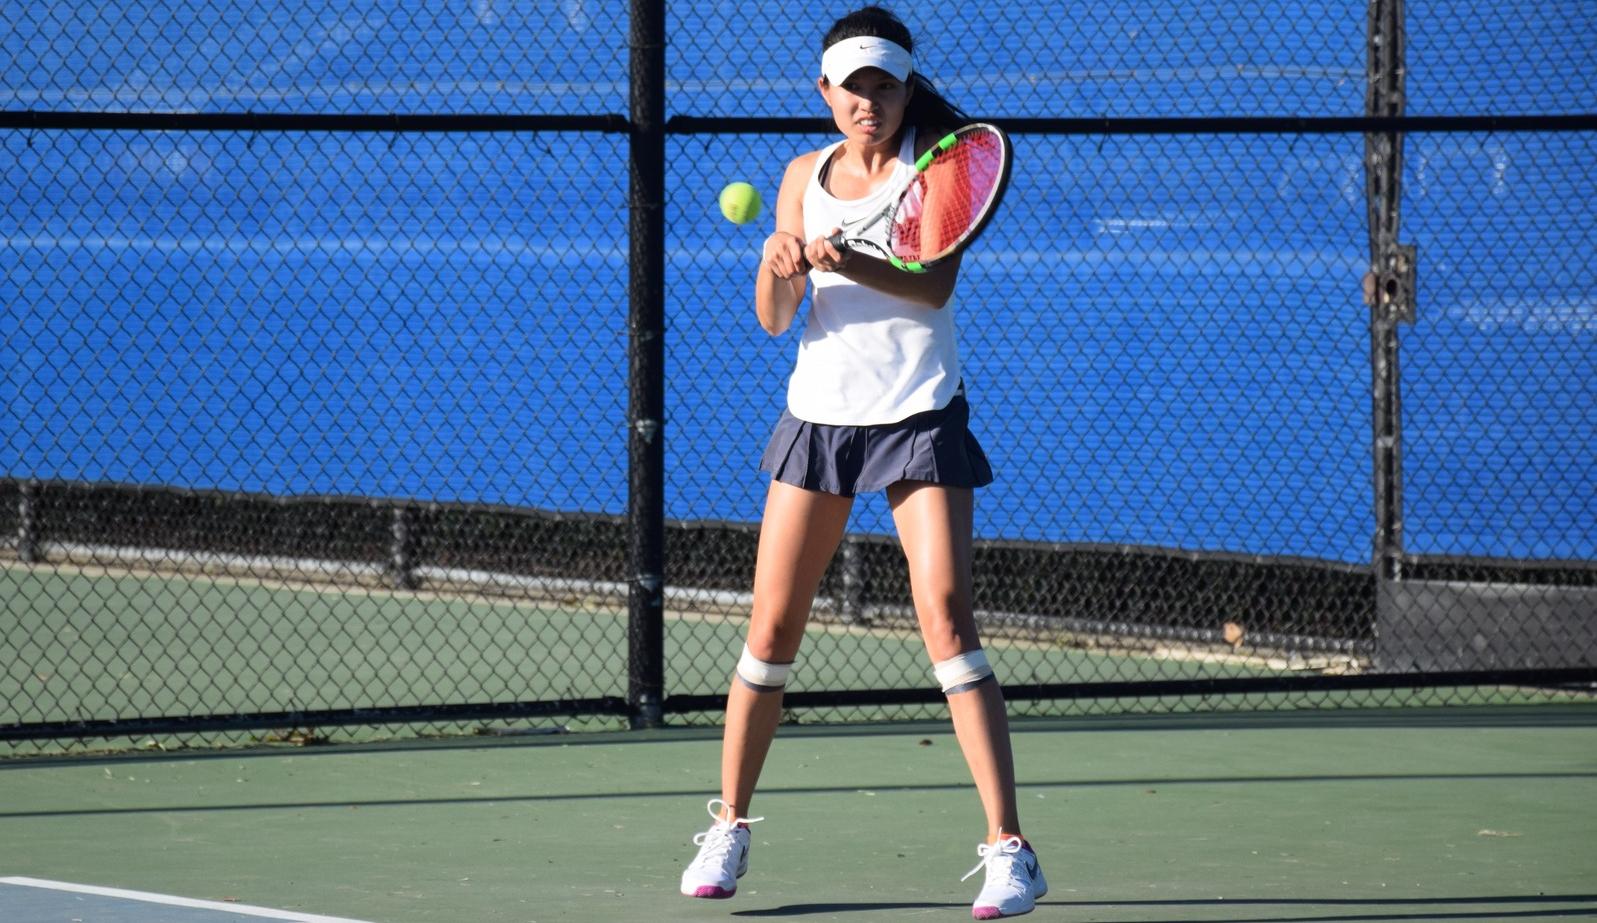 Women's tennis team preps for conference with 9-0 victory